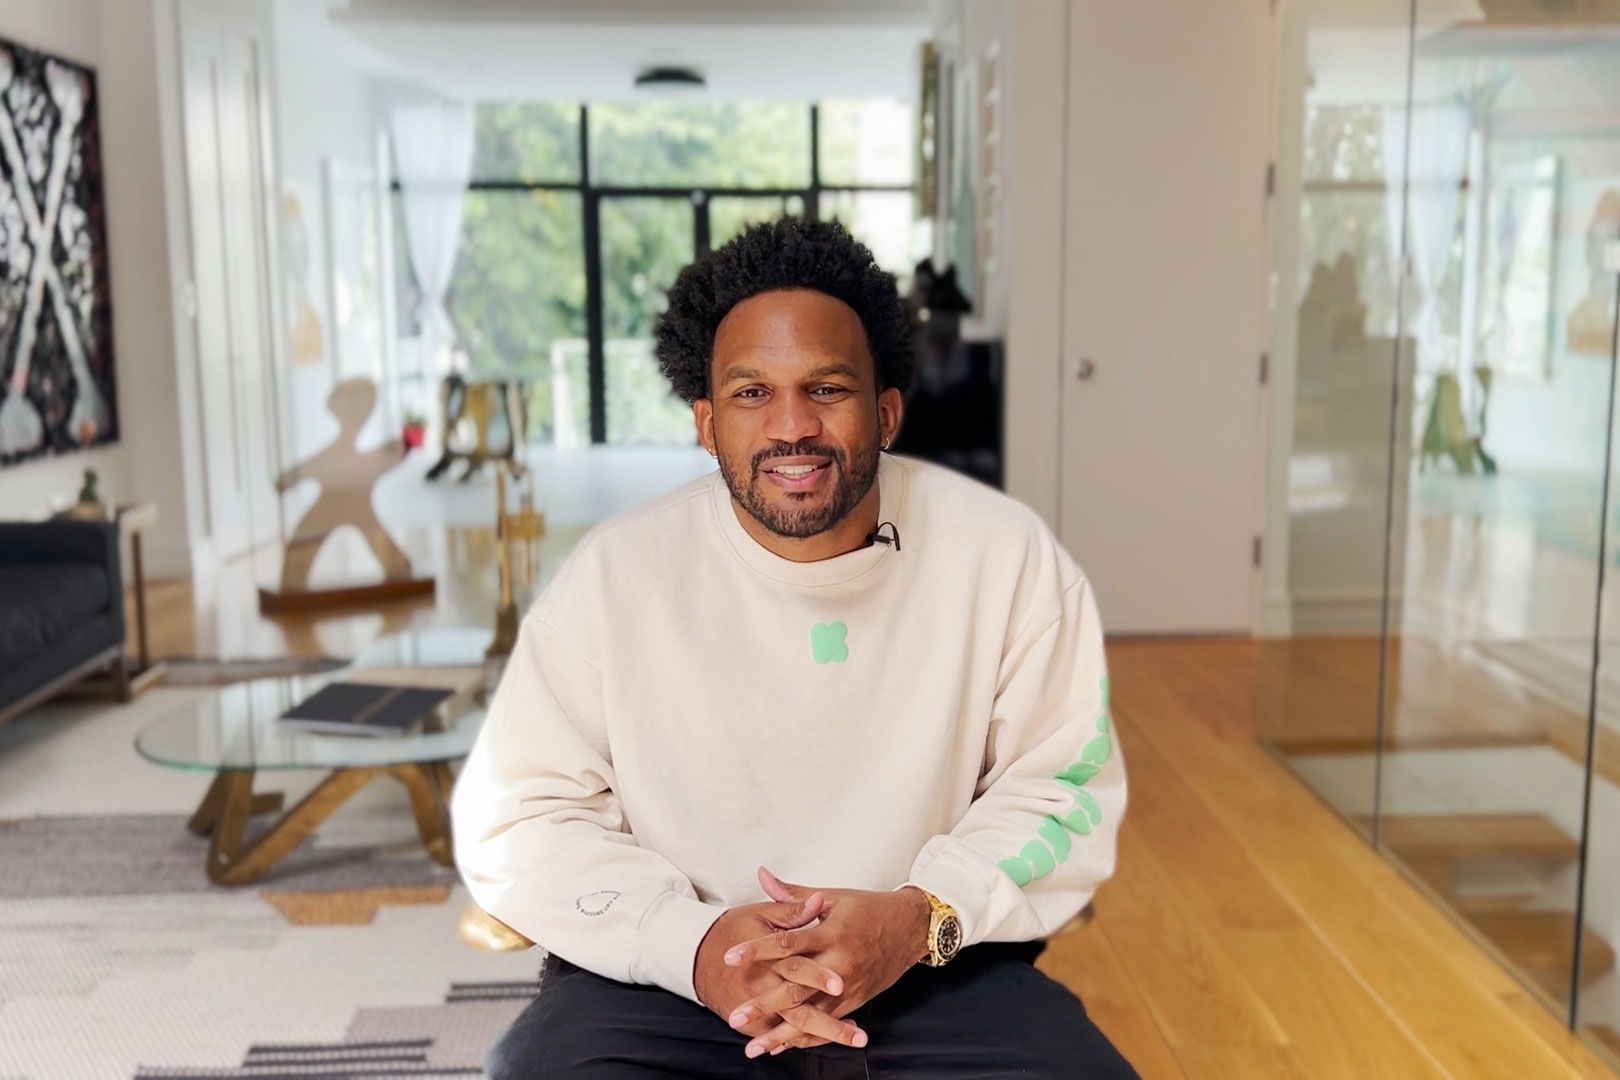 Kickstarter CEO, Everette Taylor, seated in a living room, smiling towards the camera